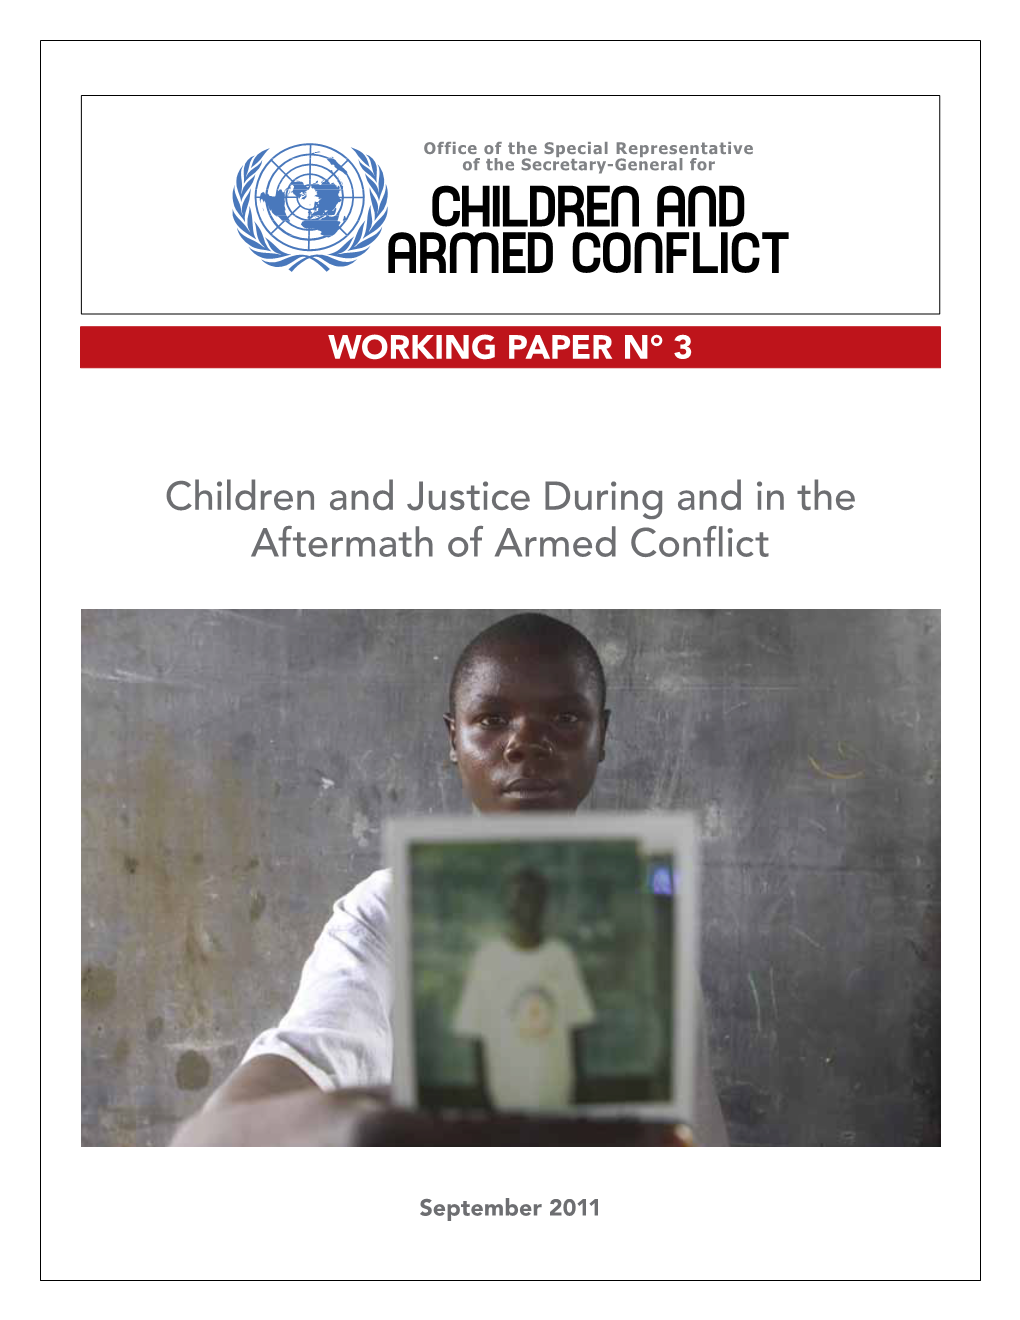 Children and Justice During and in the Aftermath of Armed Conflict